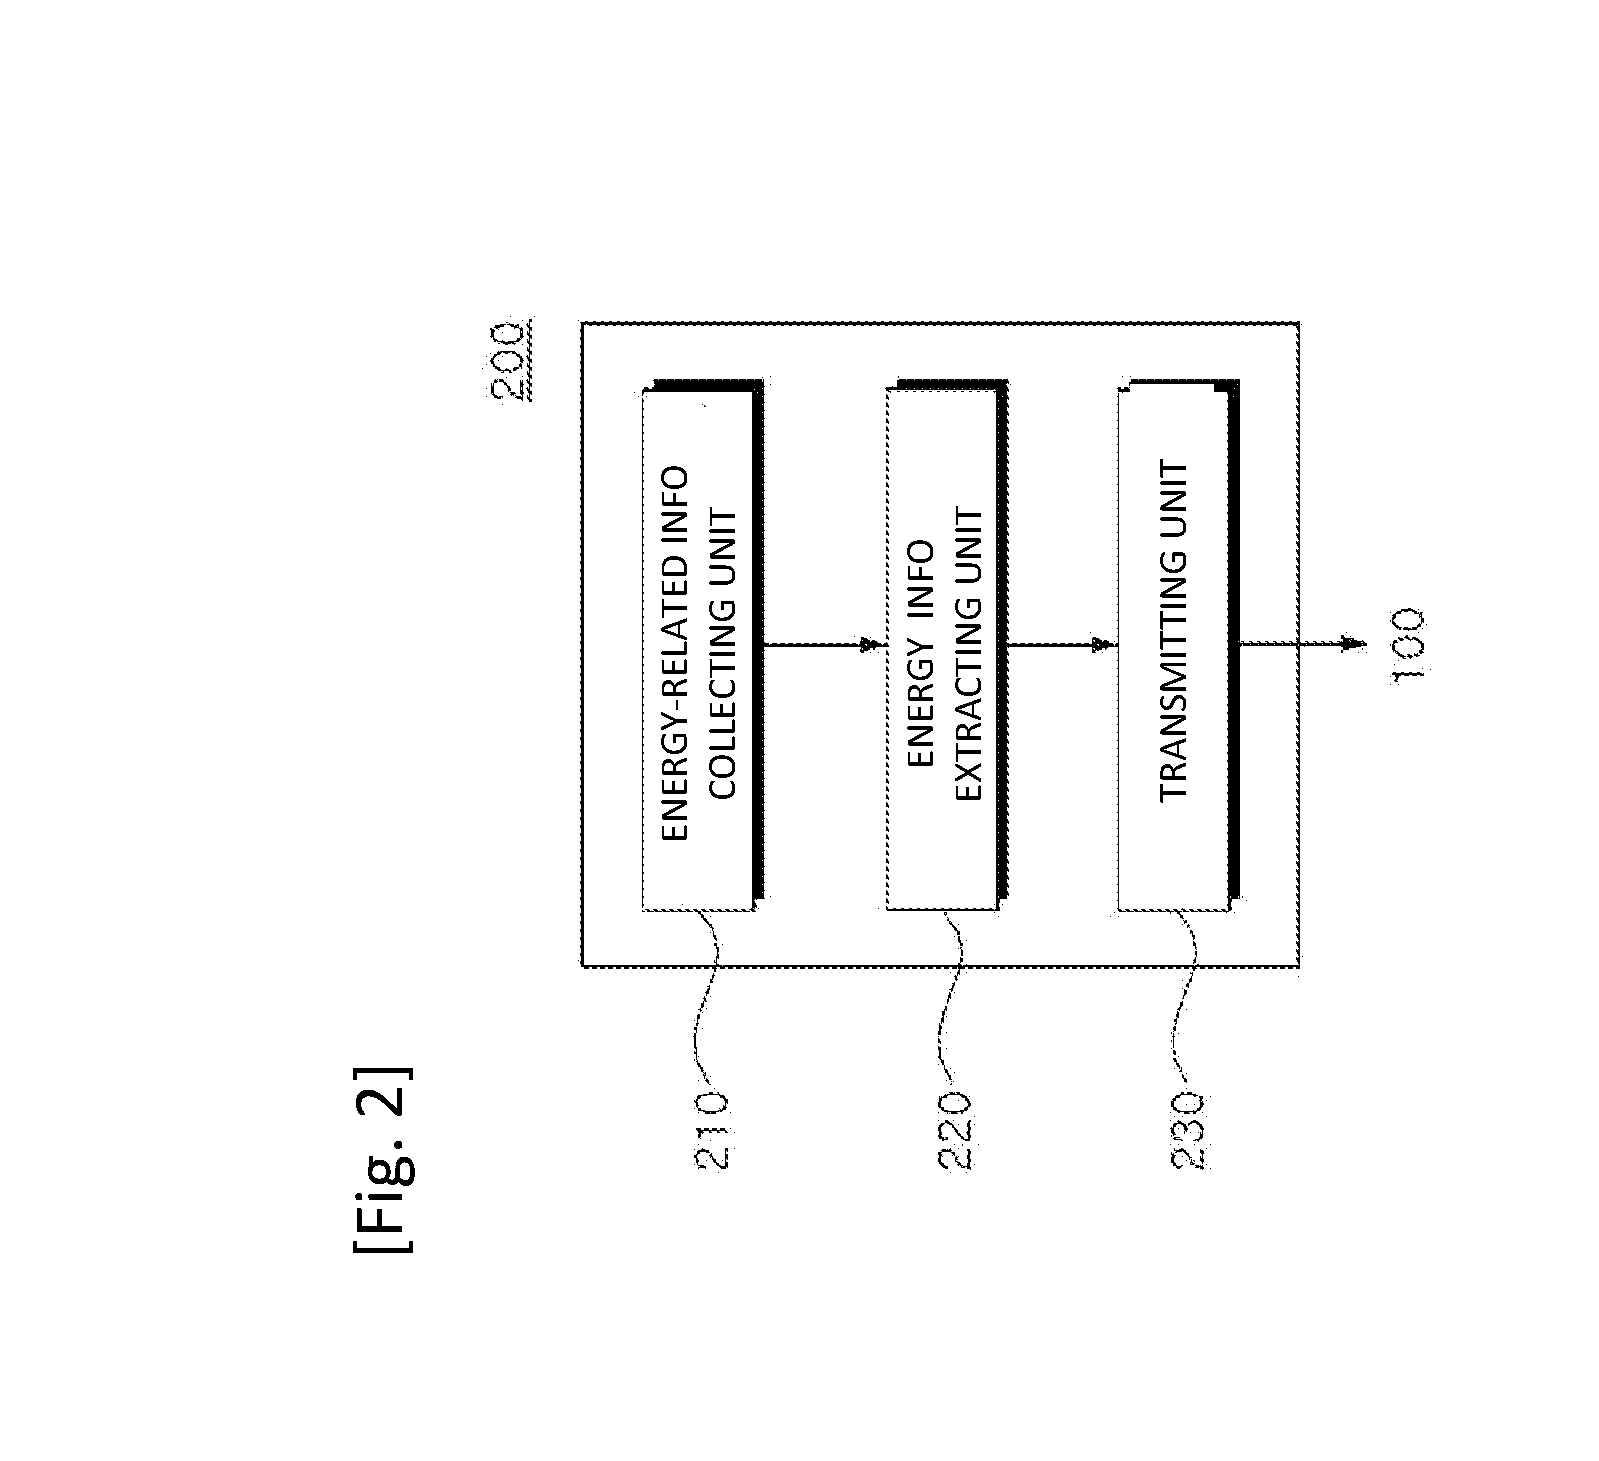 Apparatus and System for Providing Energy Information